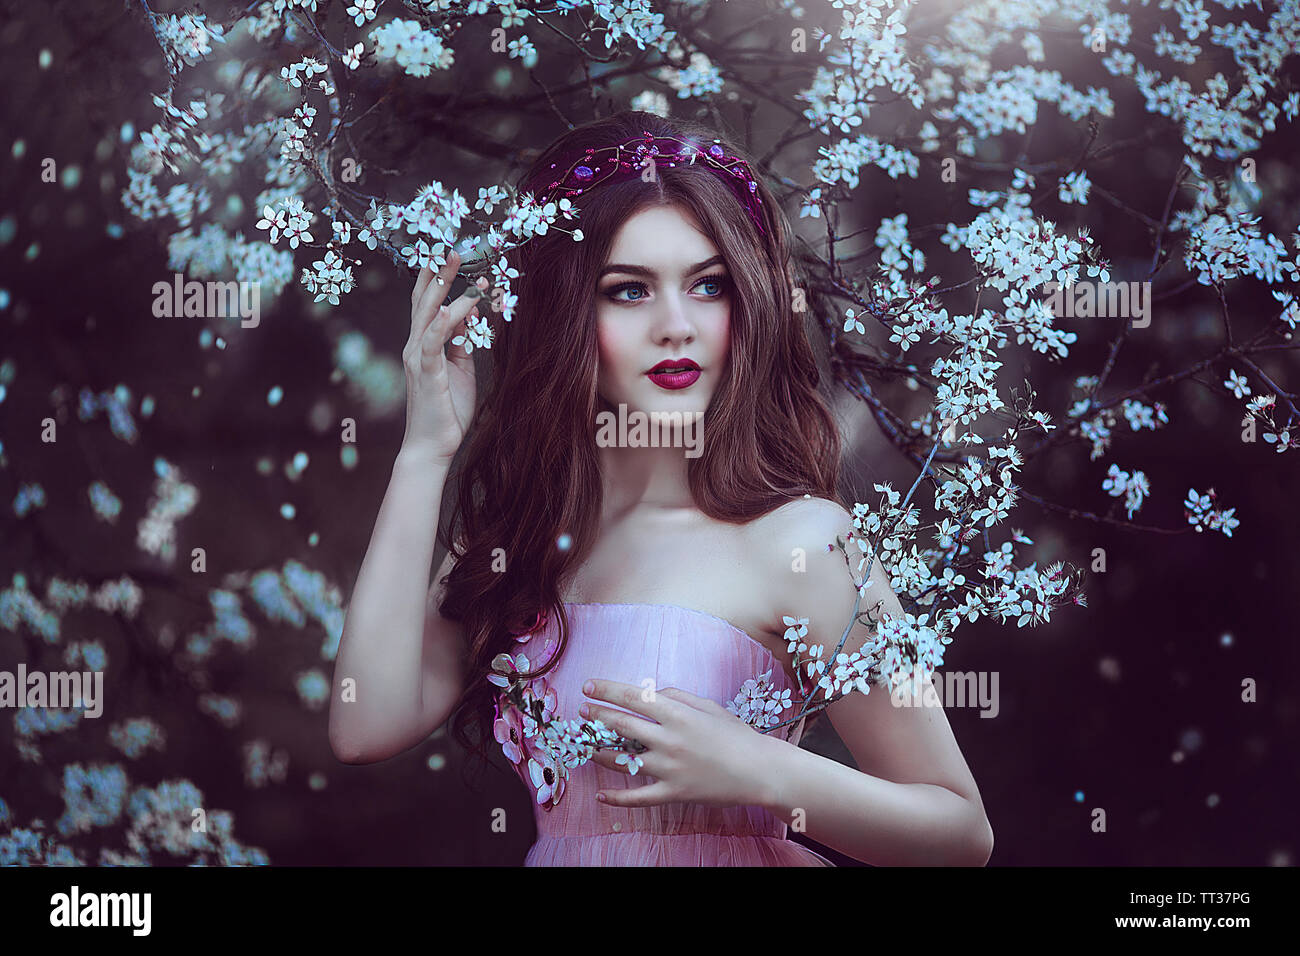 Beautiful Romantic Girl with long hair in pink dress near flowering  tree.Fantasy art. Creative colors and Artistic processing Stock Photo -  Alamy